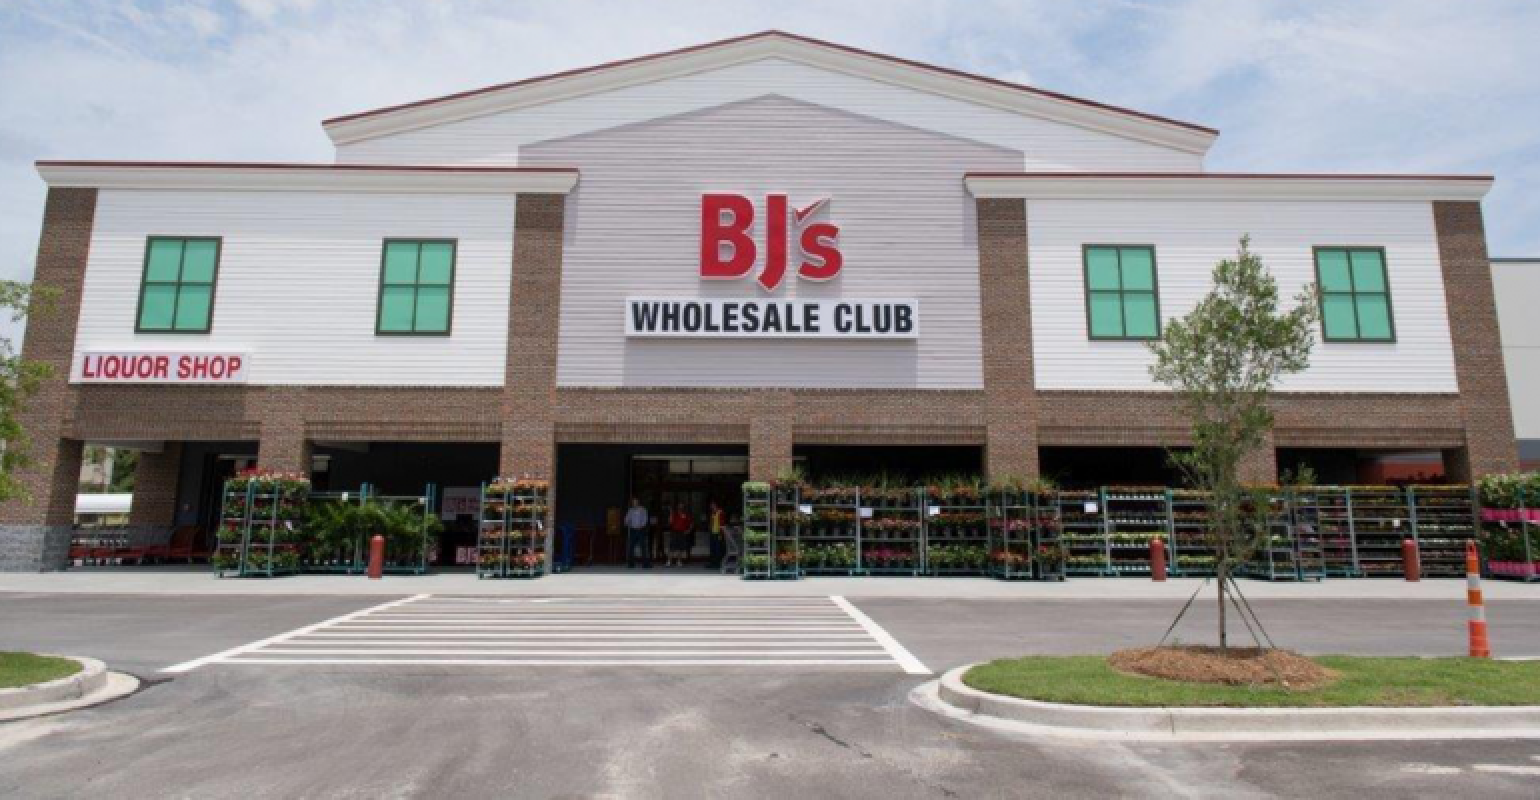 Lee Delaney to become CEO of BJ's Wholesale Club | Supermarket News